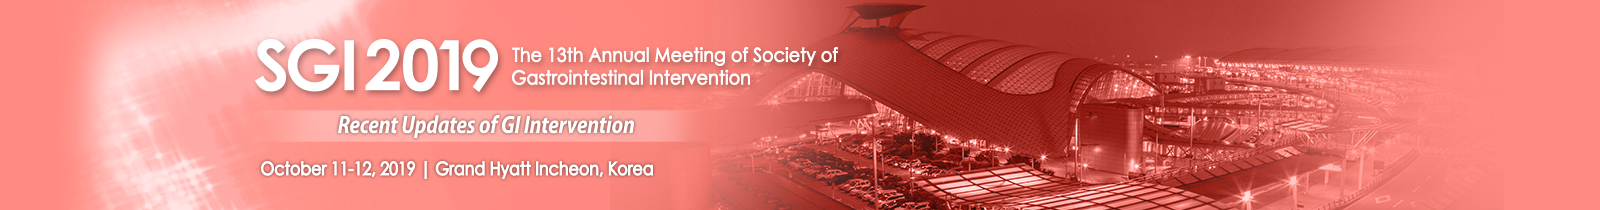 SGI 2019 The 11th Annual Meeting of Society of Gastrointestinal Intervention